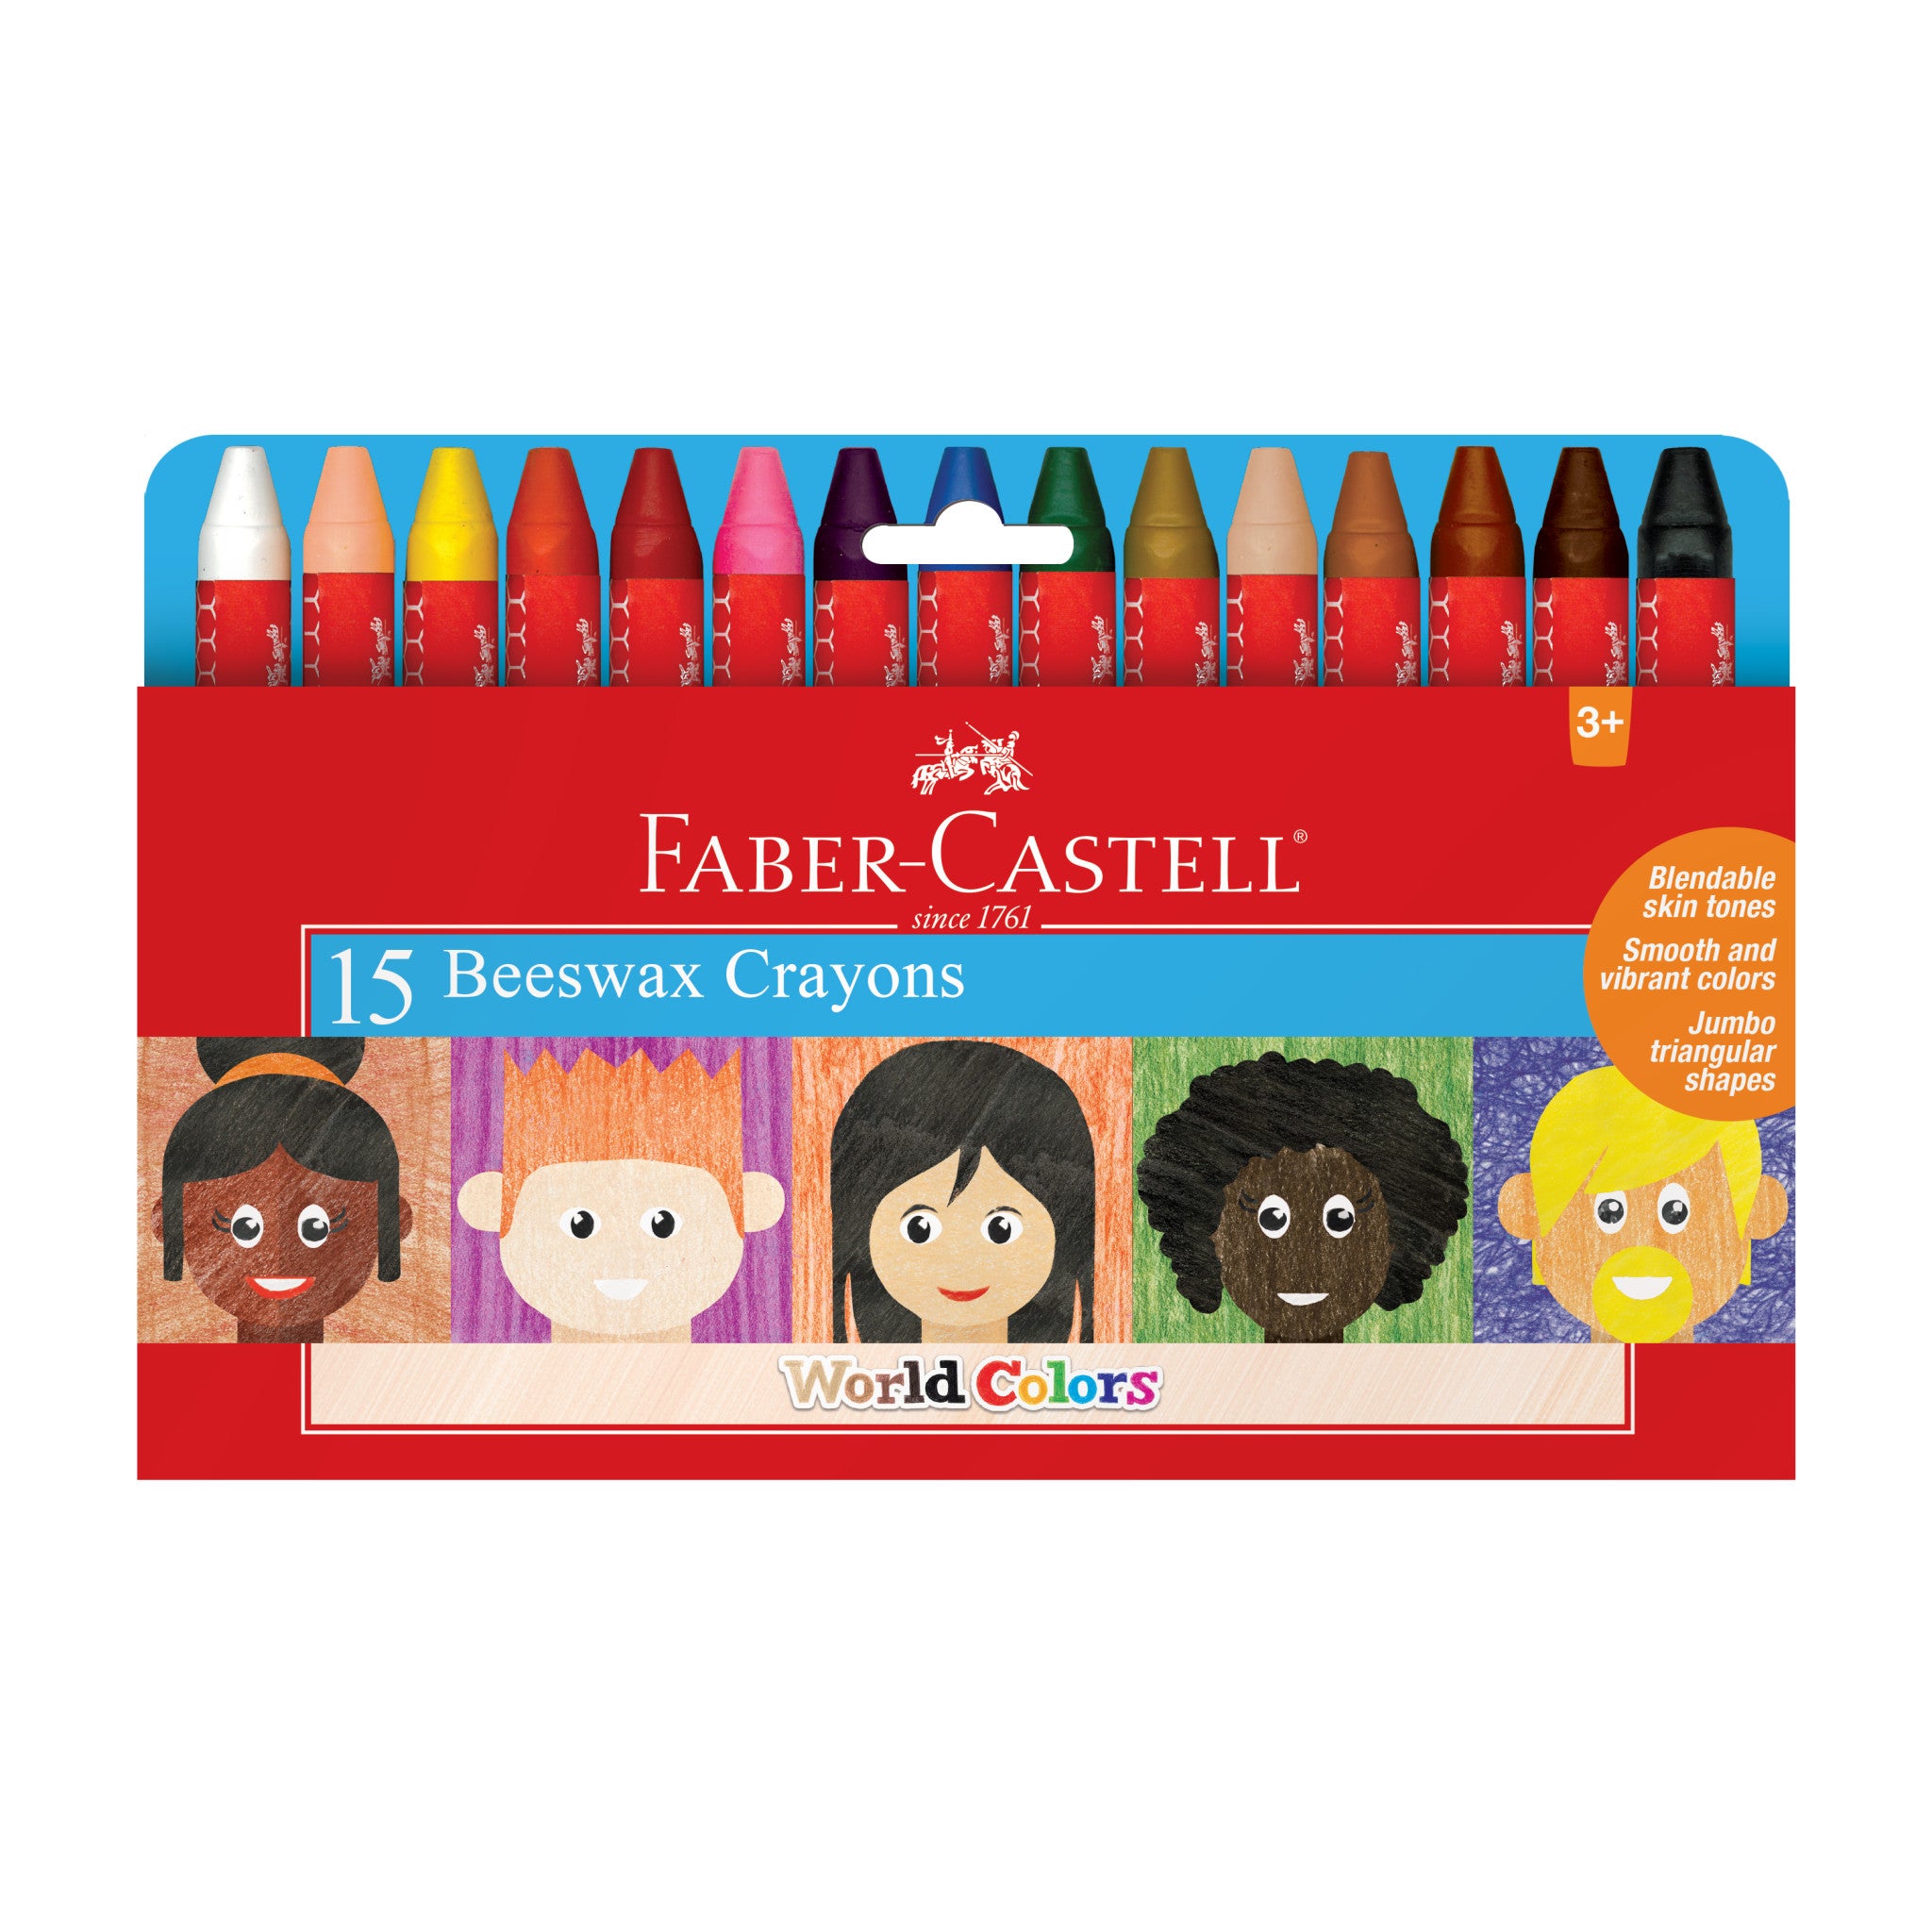 Faber-Castell Jumbo Beeswax Crayons - School Pack of 240